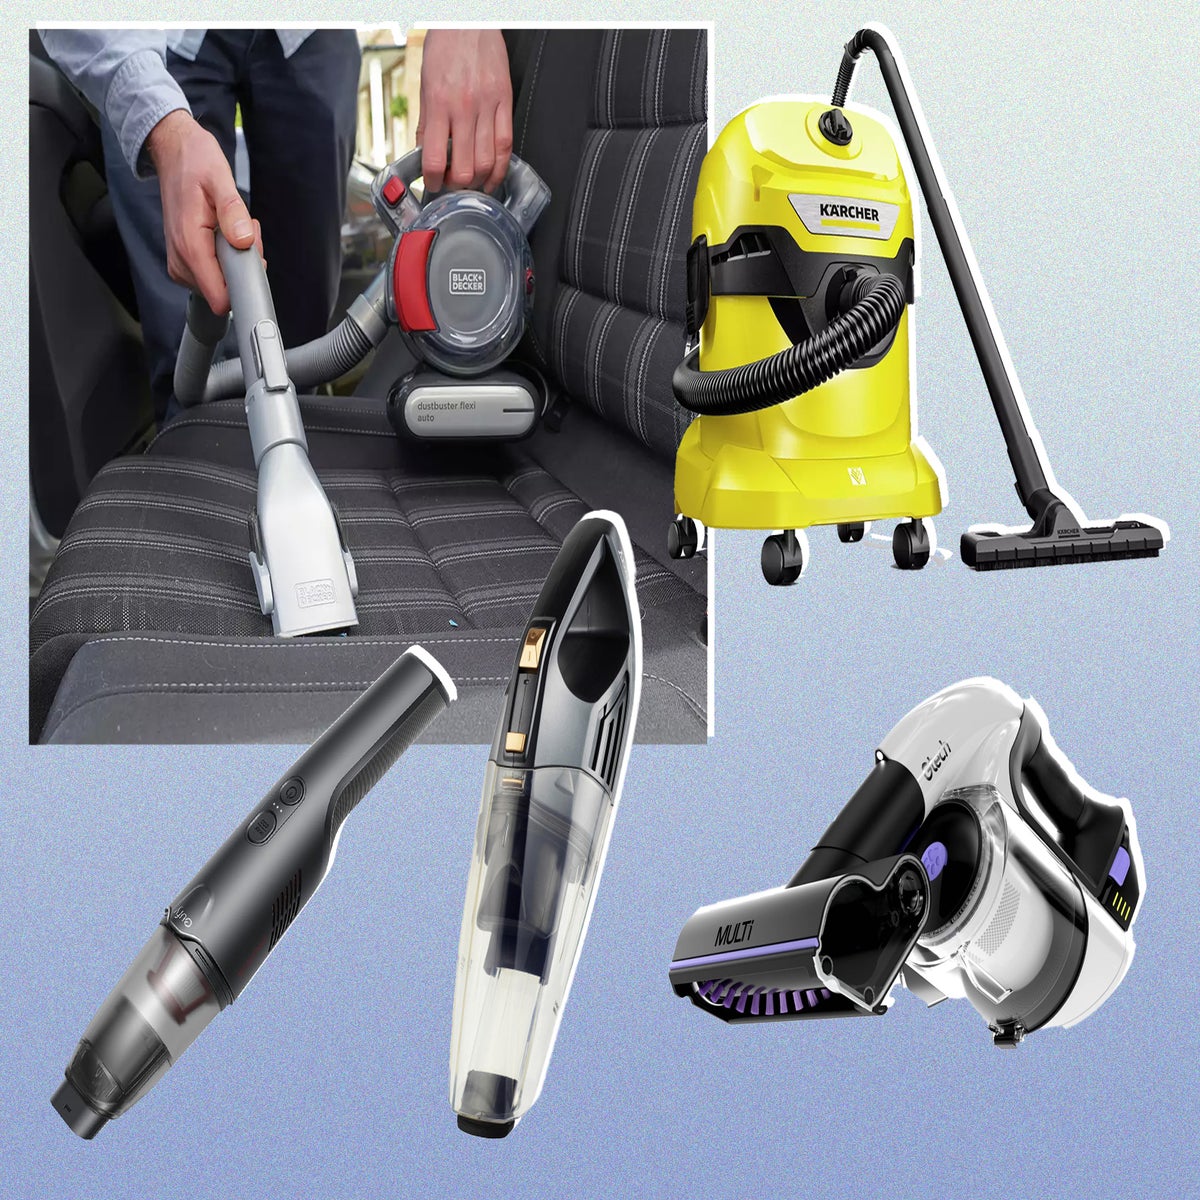 https://static.independent.co.uk/2023/07/25/17/car%20vacuums%20-2.jpg?width=1200&height=1200&fit=crop